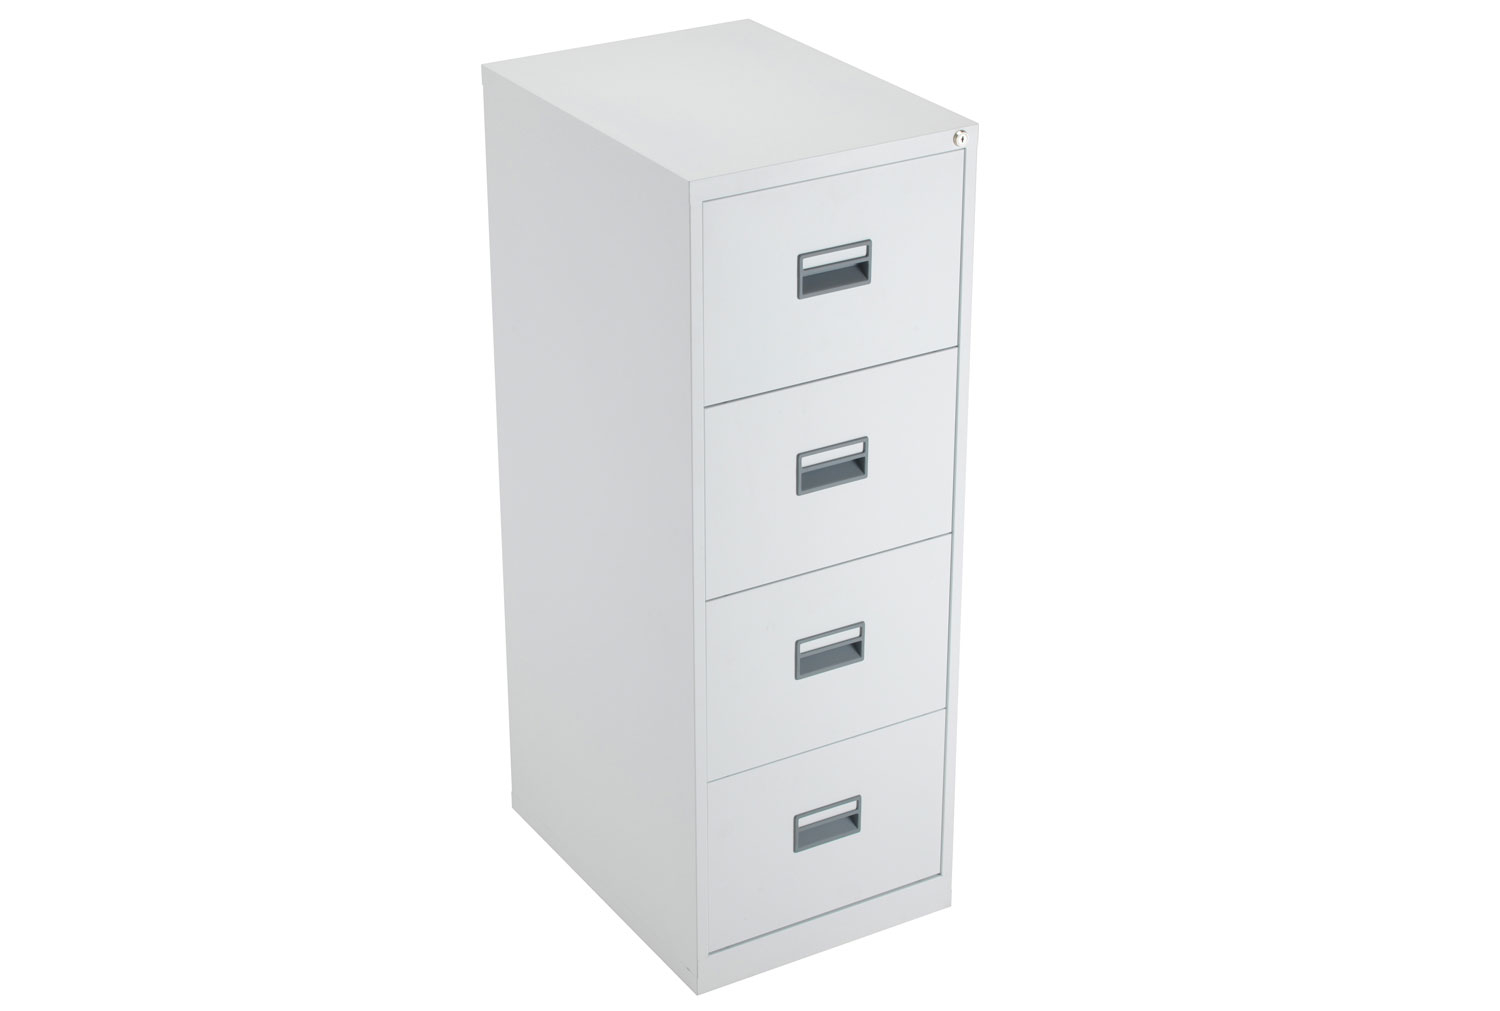 Value Line Metal Filing Cabinet, 4 Drawer - 47wx62dx130h (cm), White, Express Delivery